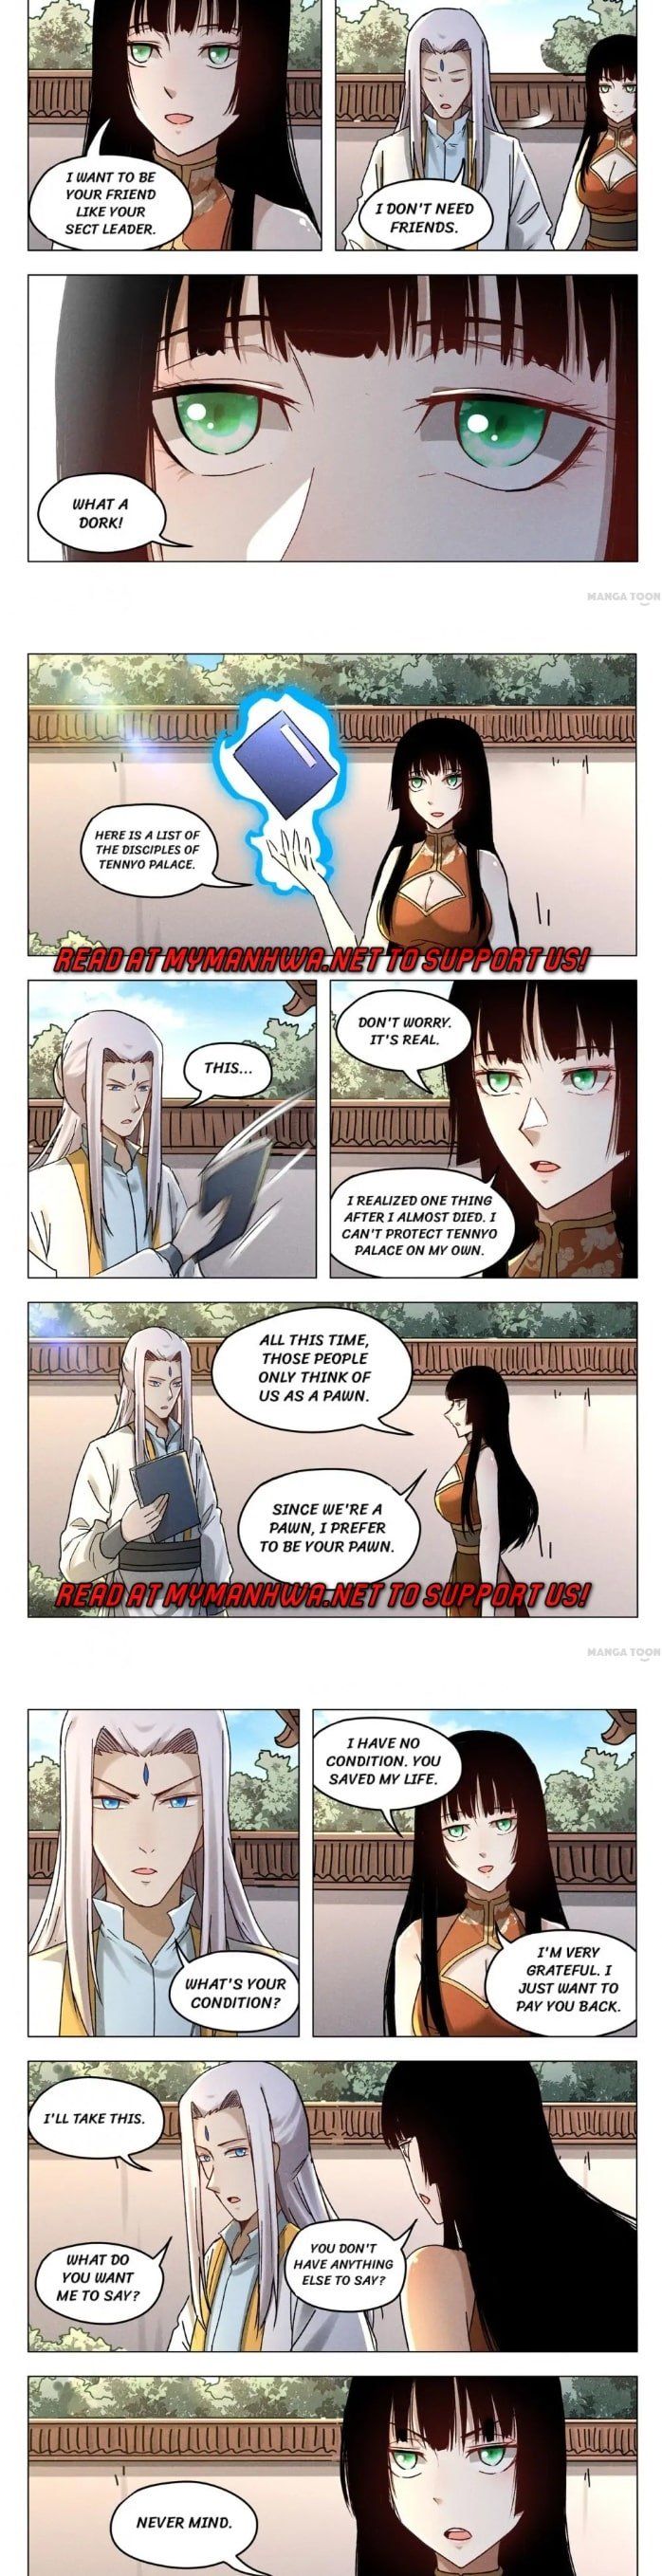 Master of Legendary Realms Chapter 400 page 3